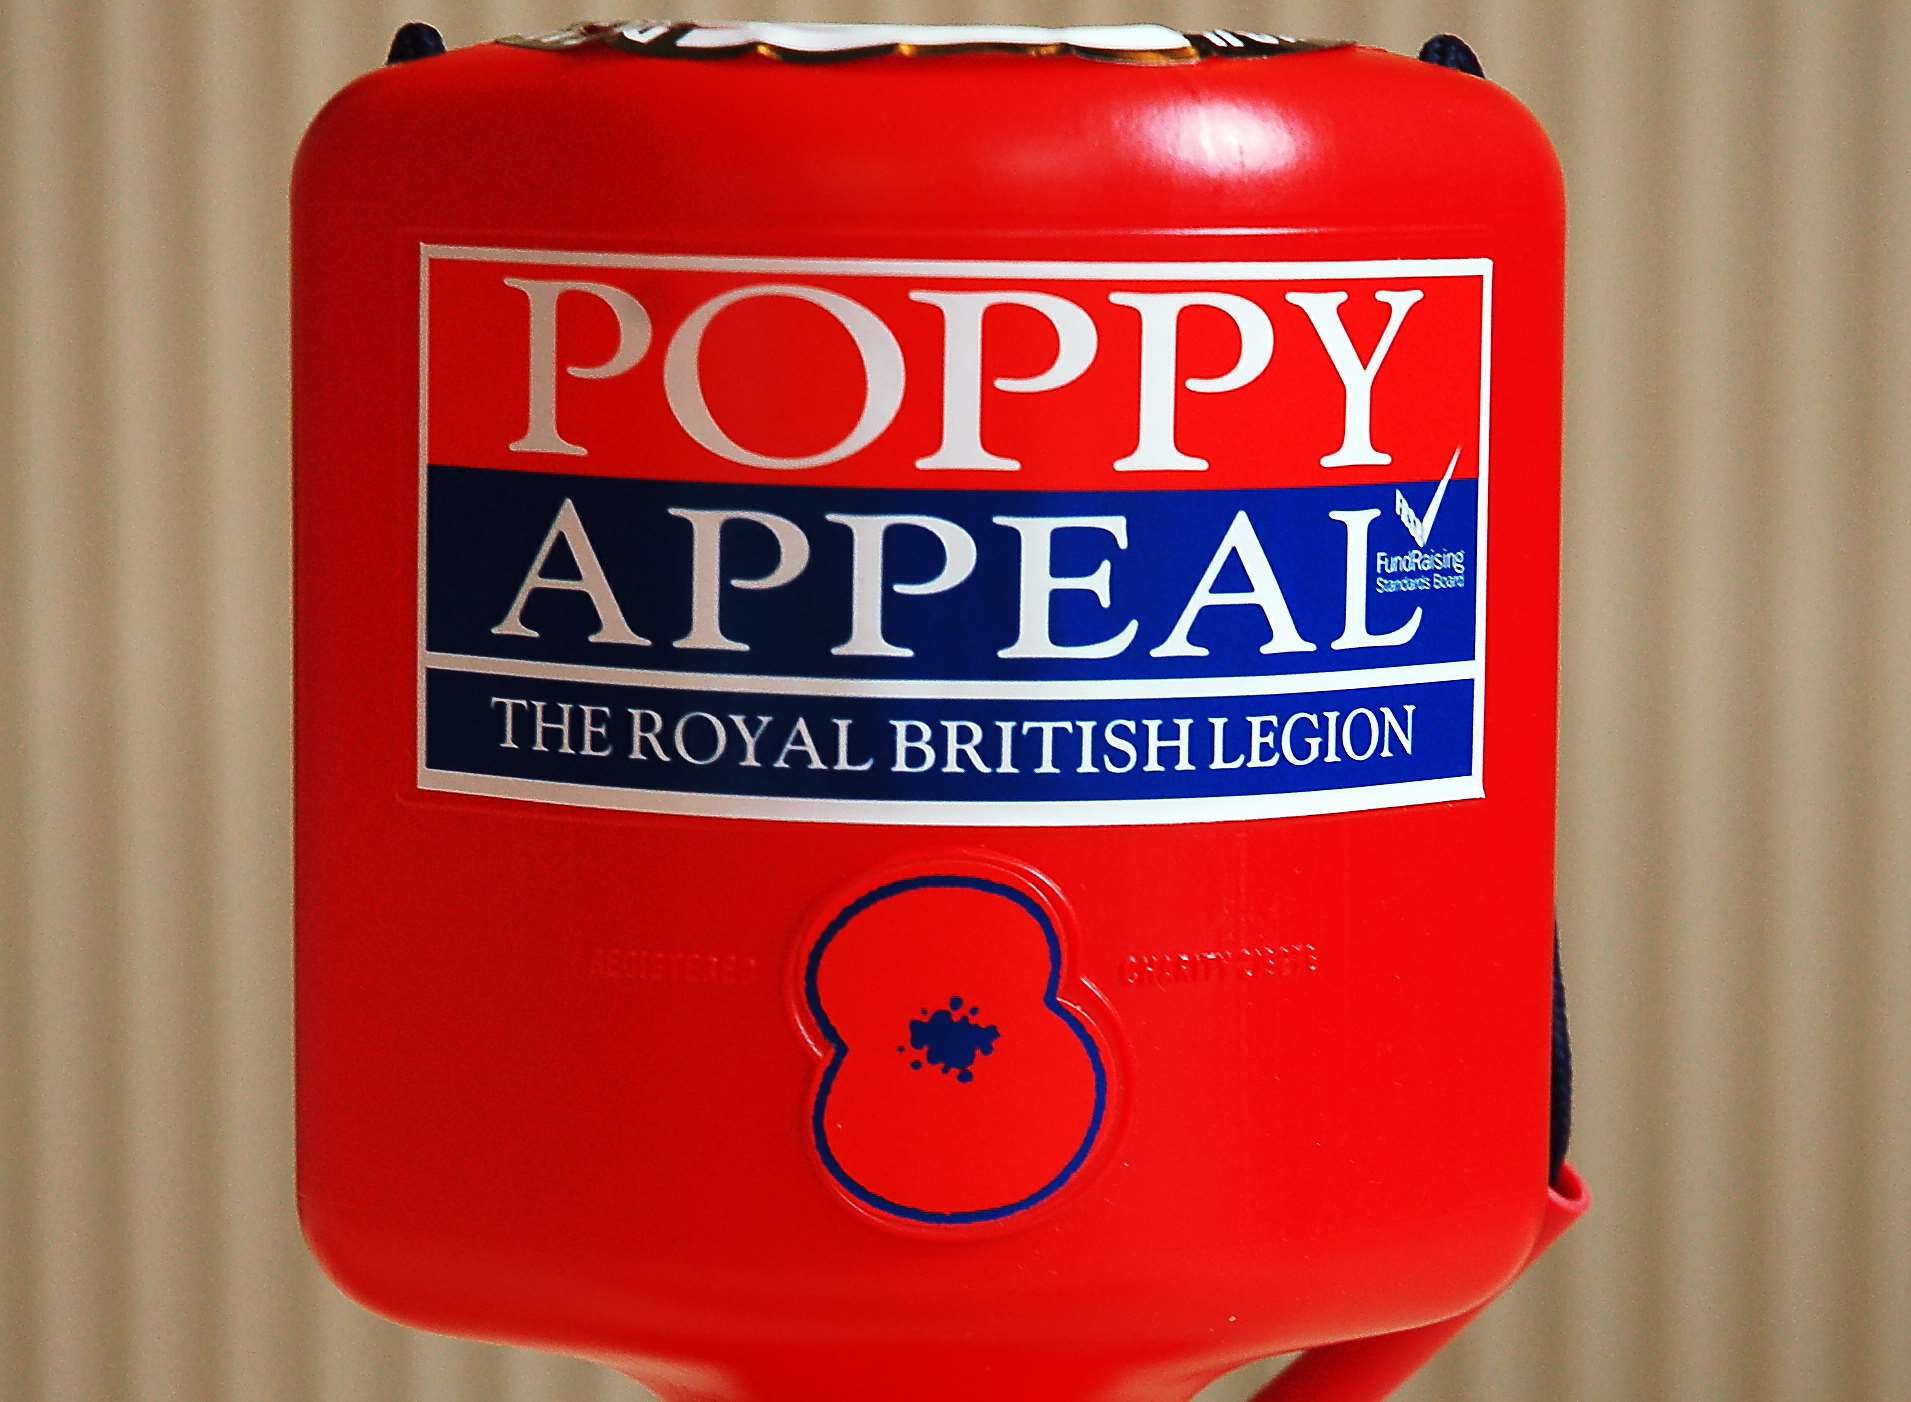 The money was meant to go towards the Poppy Appeal